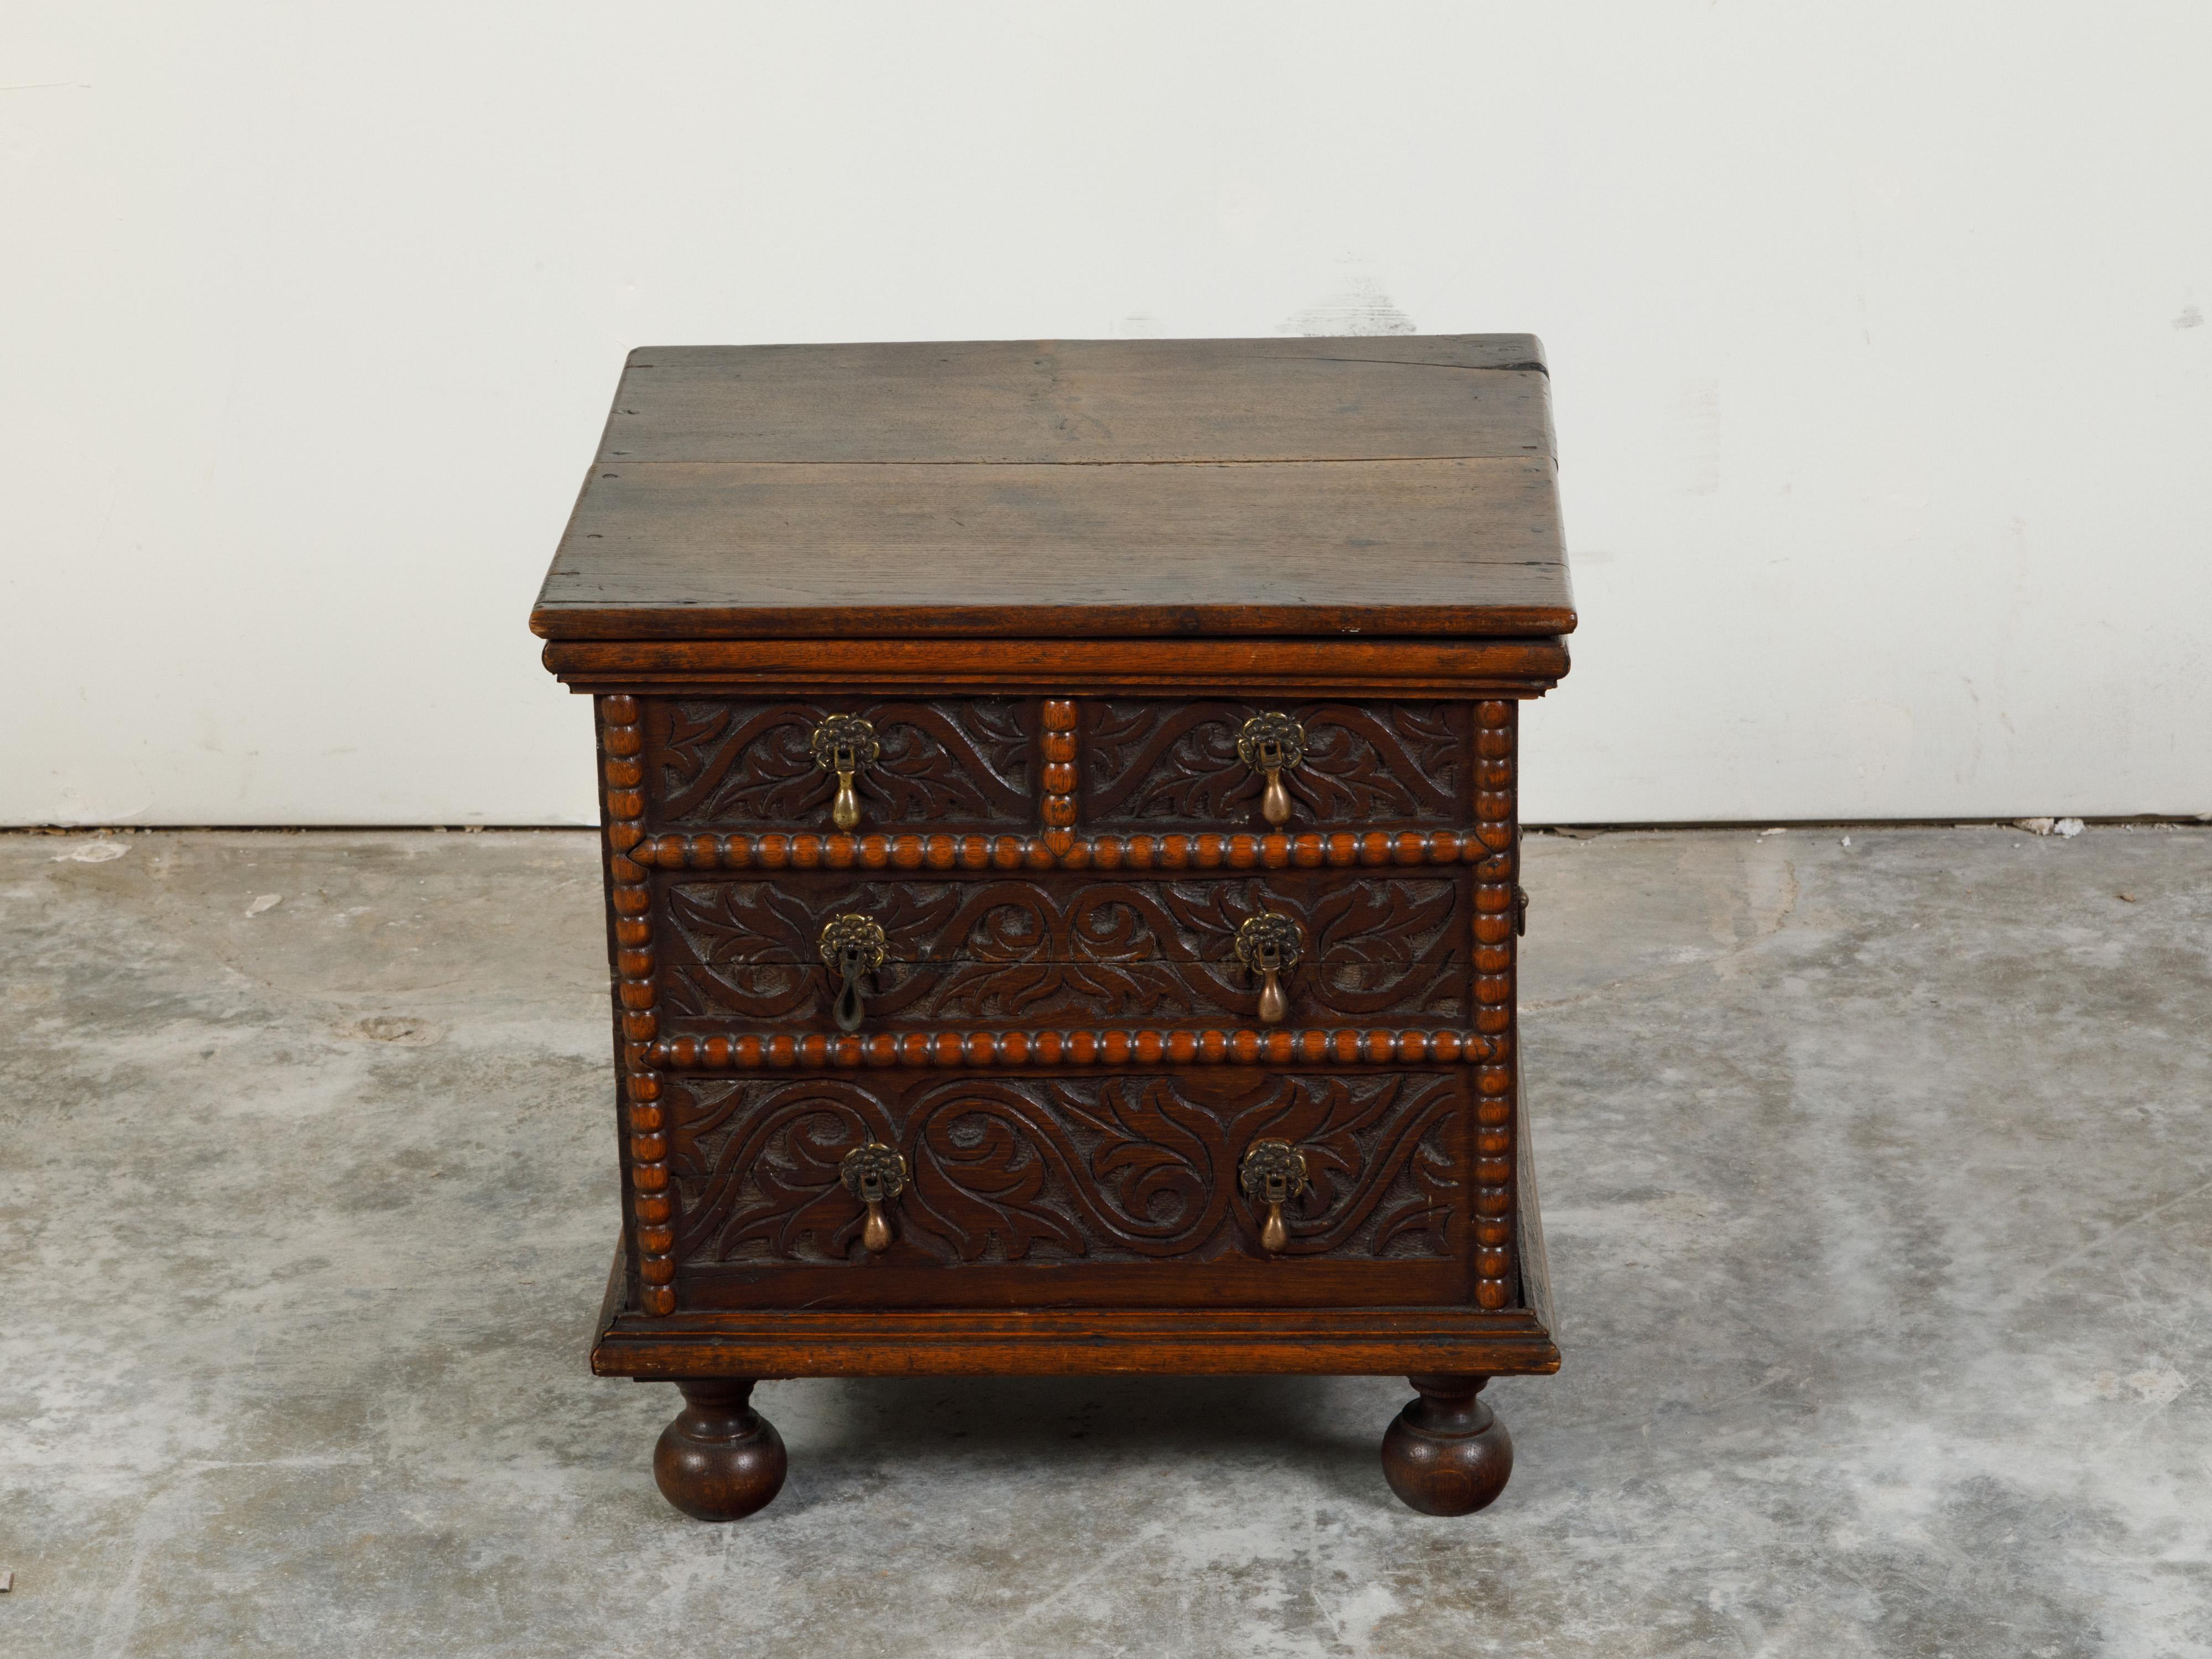 An English oak blanket chest from the late 18th century, with faux drawers and carved scrolls. Created in England during the later years of the 18th century, this oak blanket chest features a rectangular planked lid opening to reveal a convenient